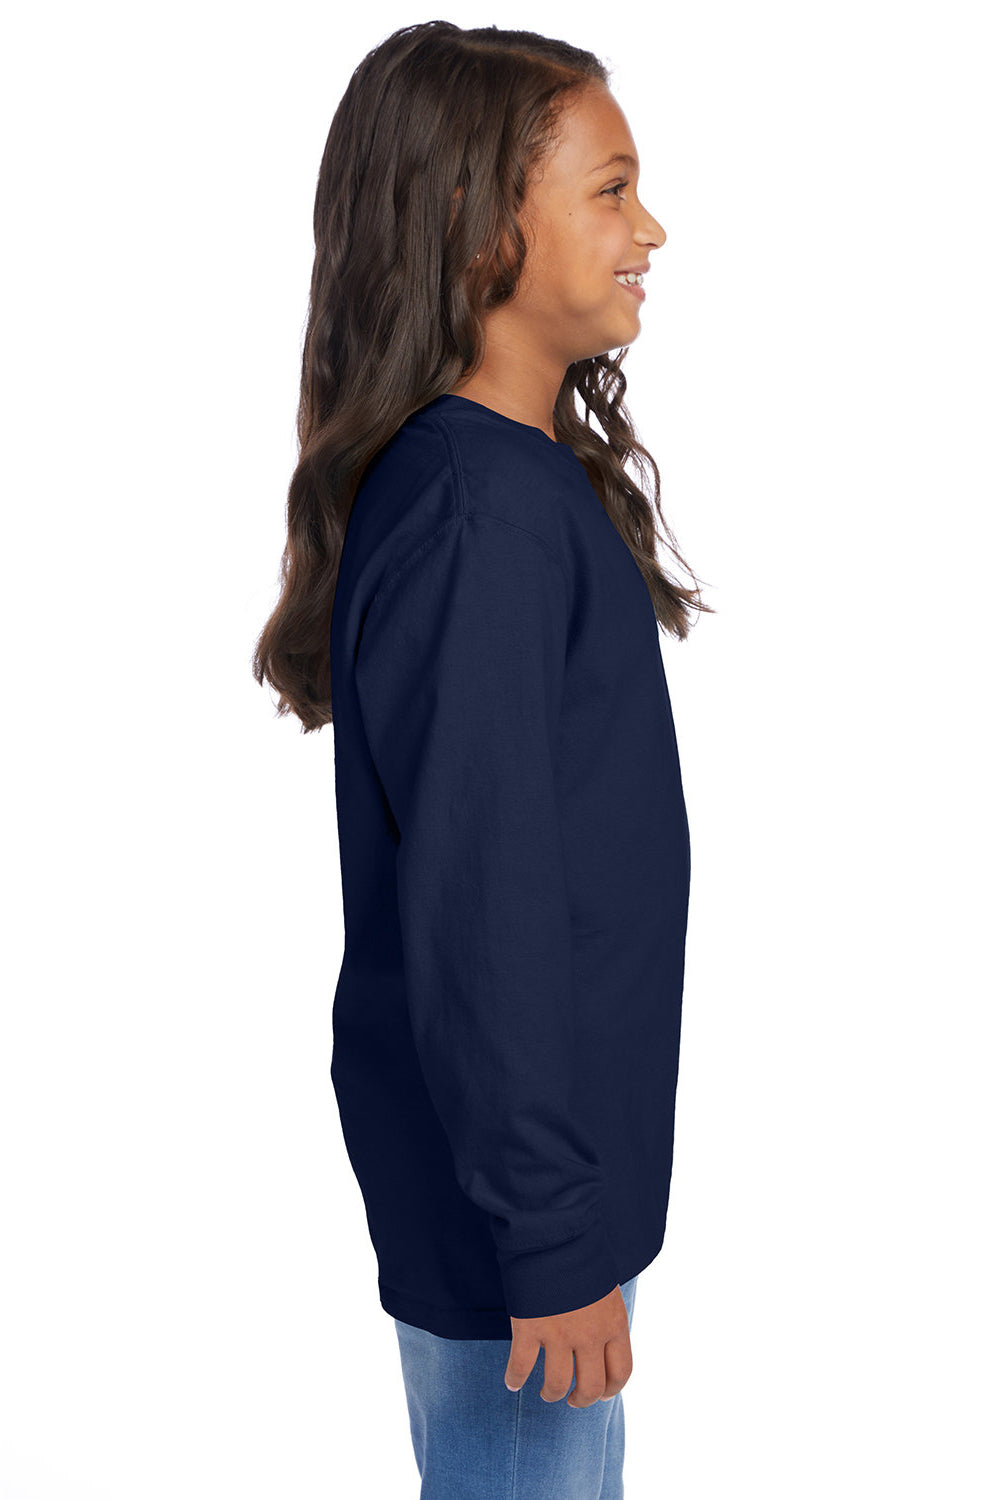 ComfortWash By Hanes GDH275 Youth Garment Dyed Long Sleeve Crewneck T-Shirt Navy Blue Model Side